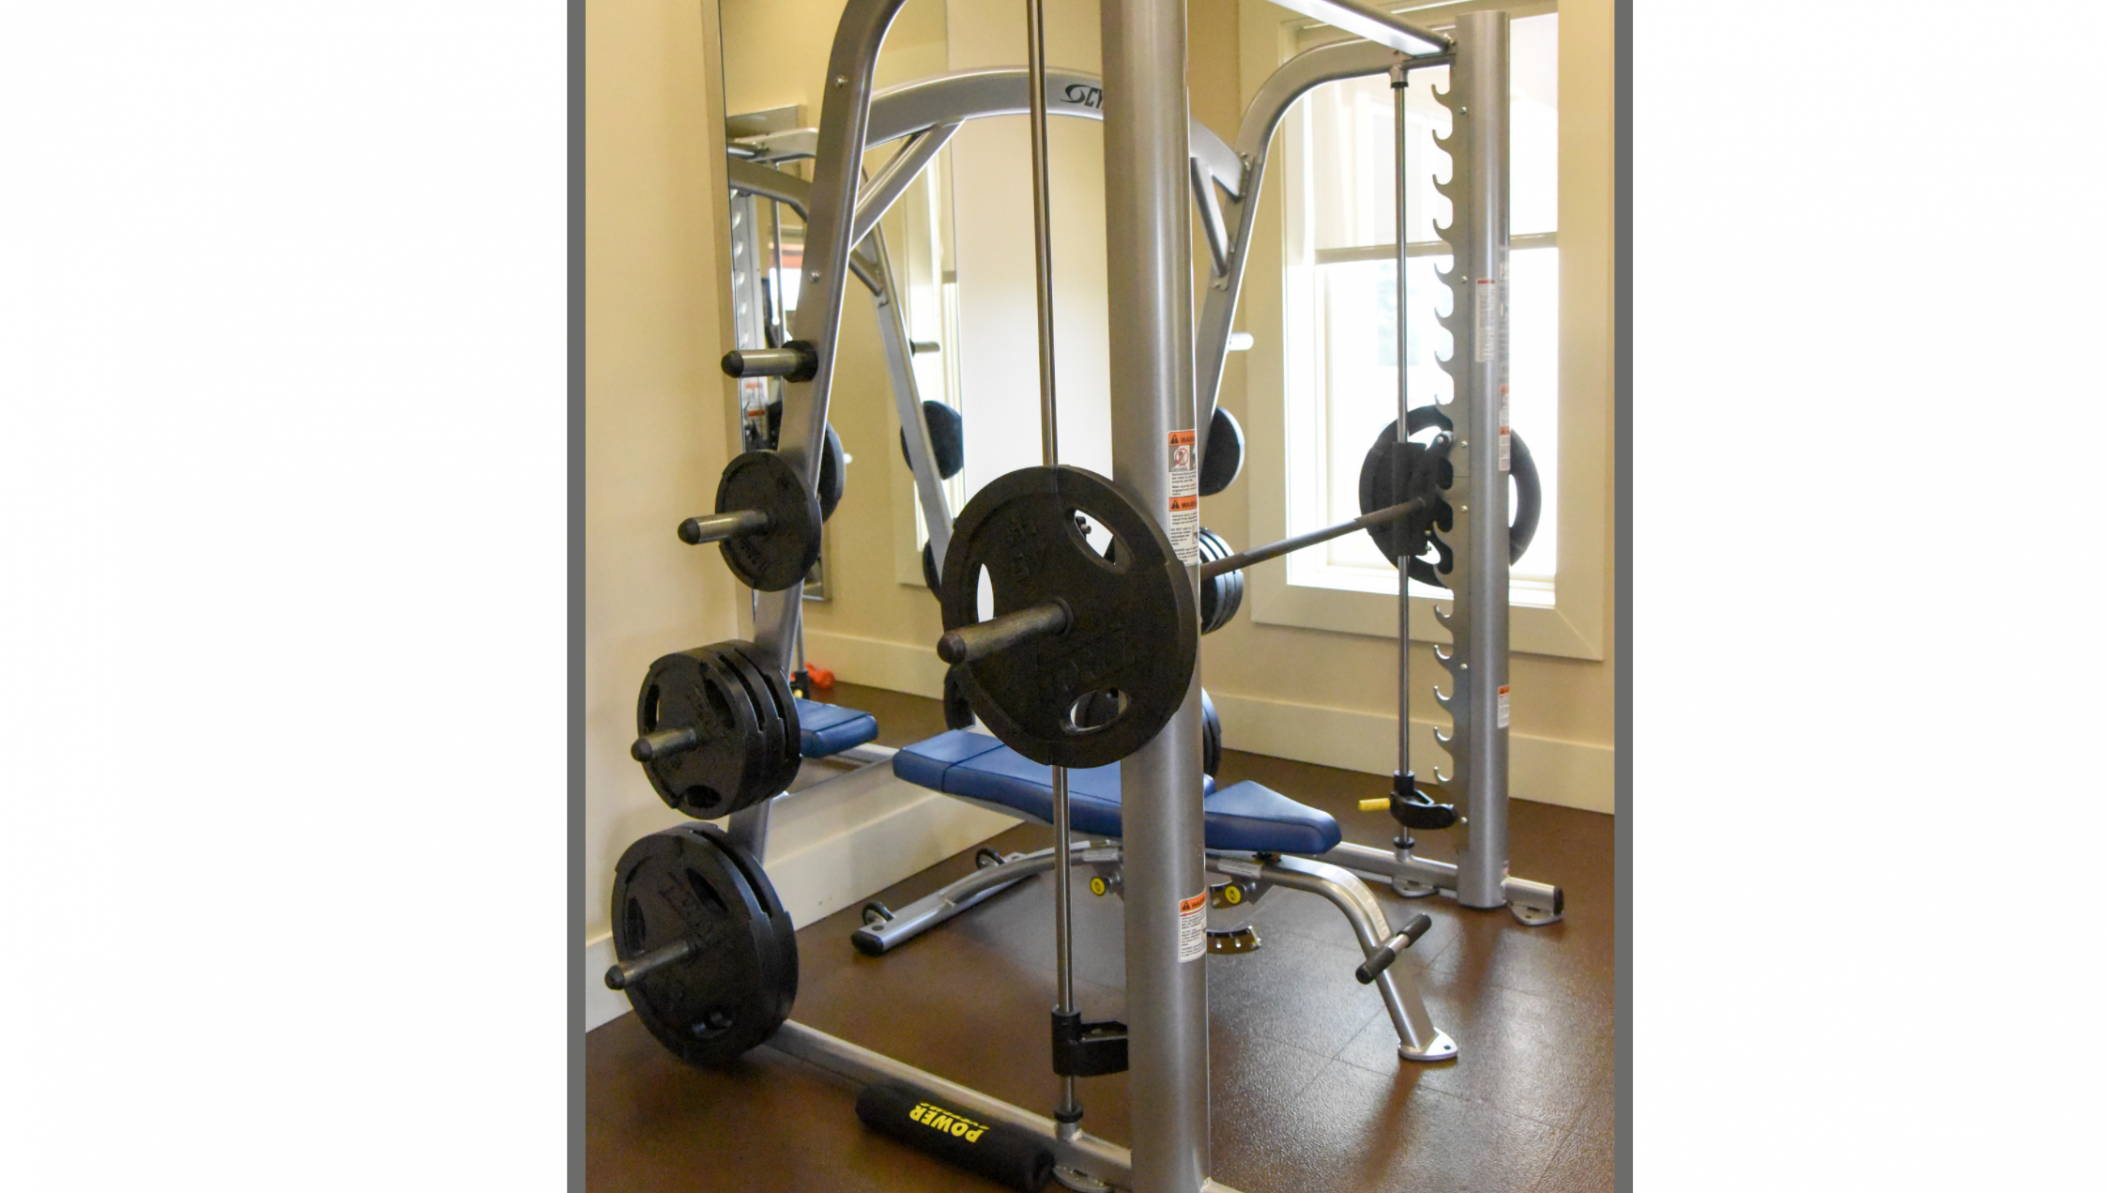 Cybex Smith Press in Corporate Setting with Adjustable Bench.